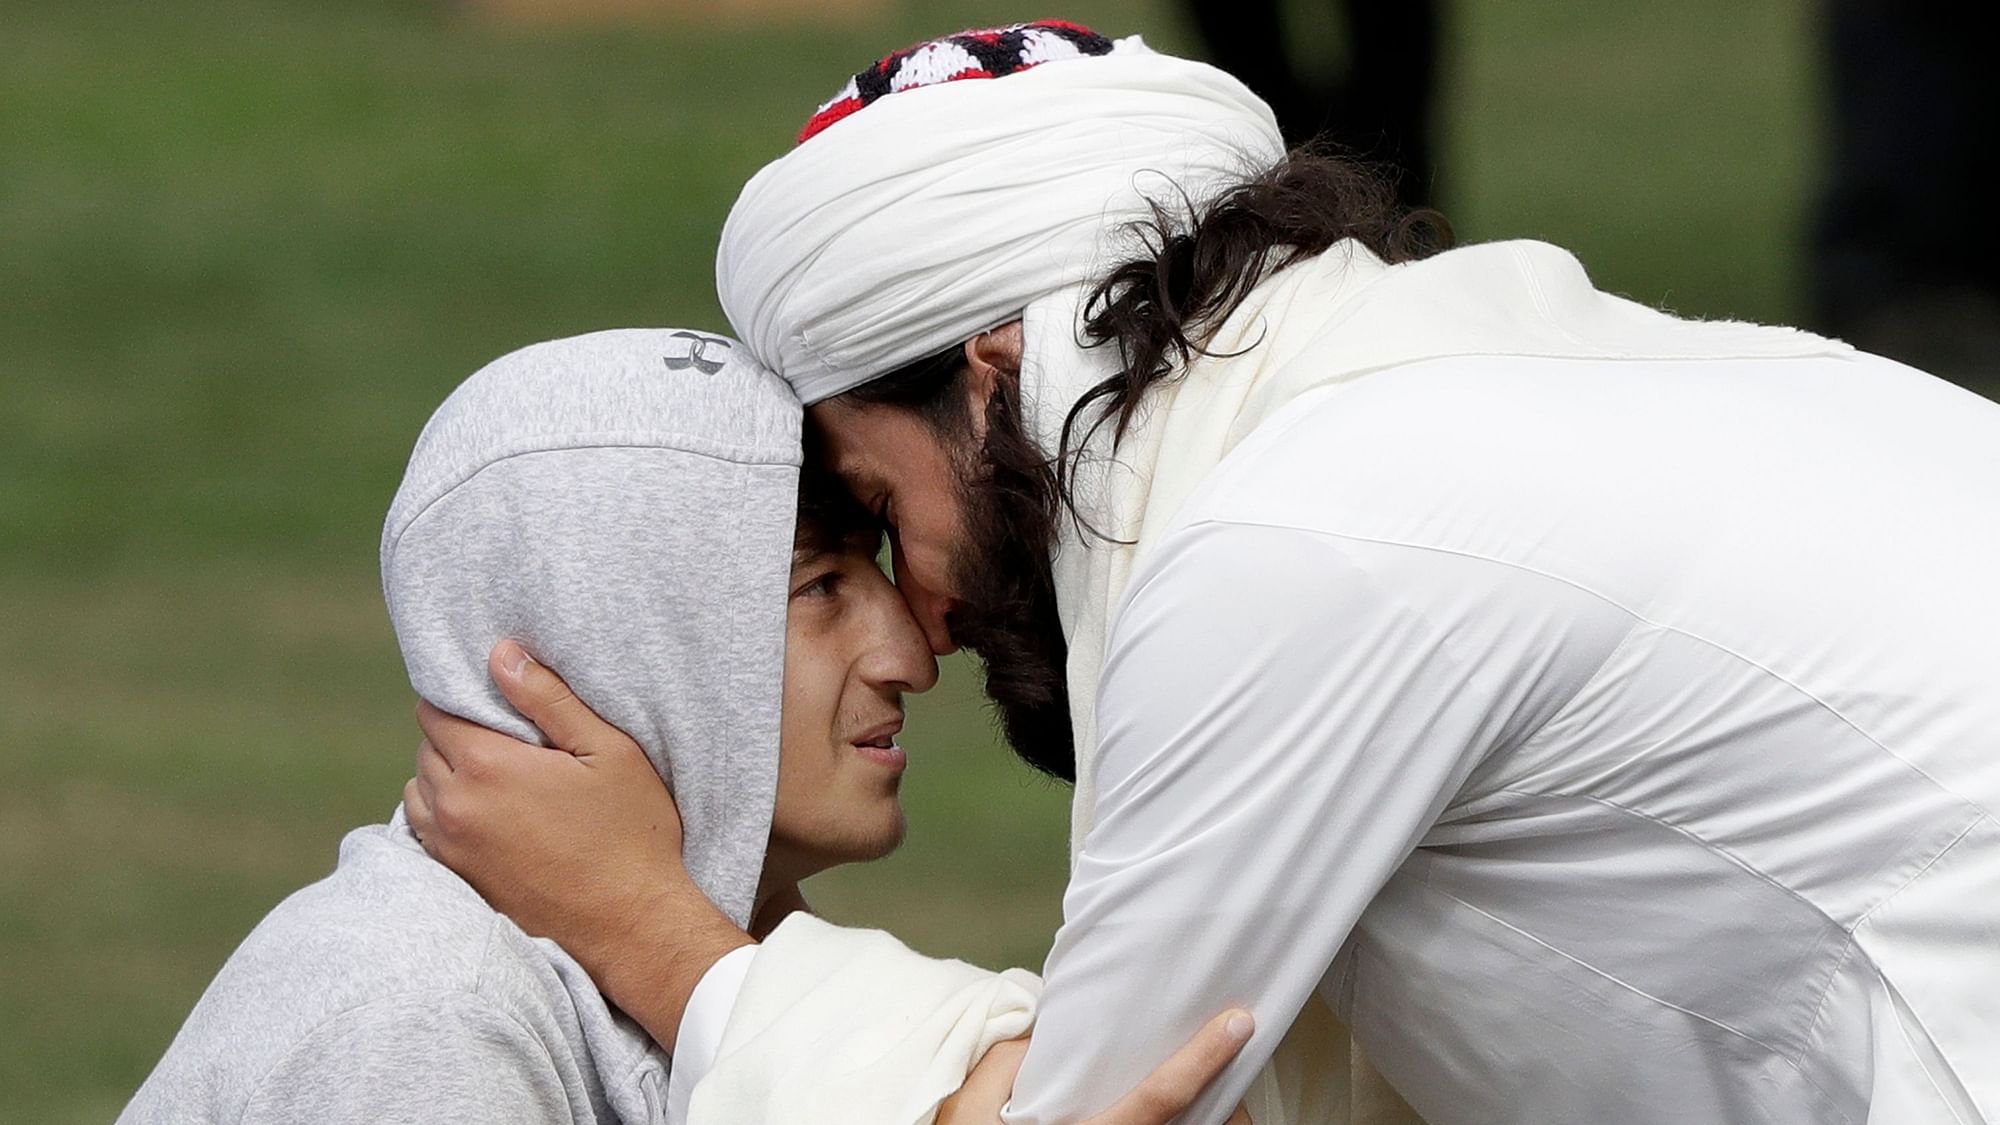 People across New Zealand observed the Muslim call to prayer on Friday, as the country mourned the Christchurch terror attack.